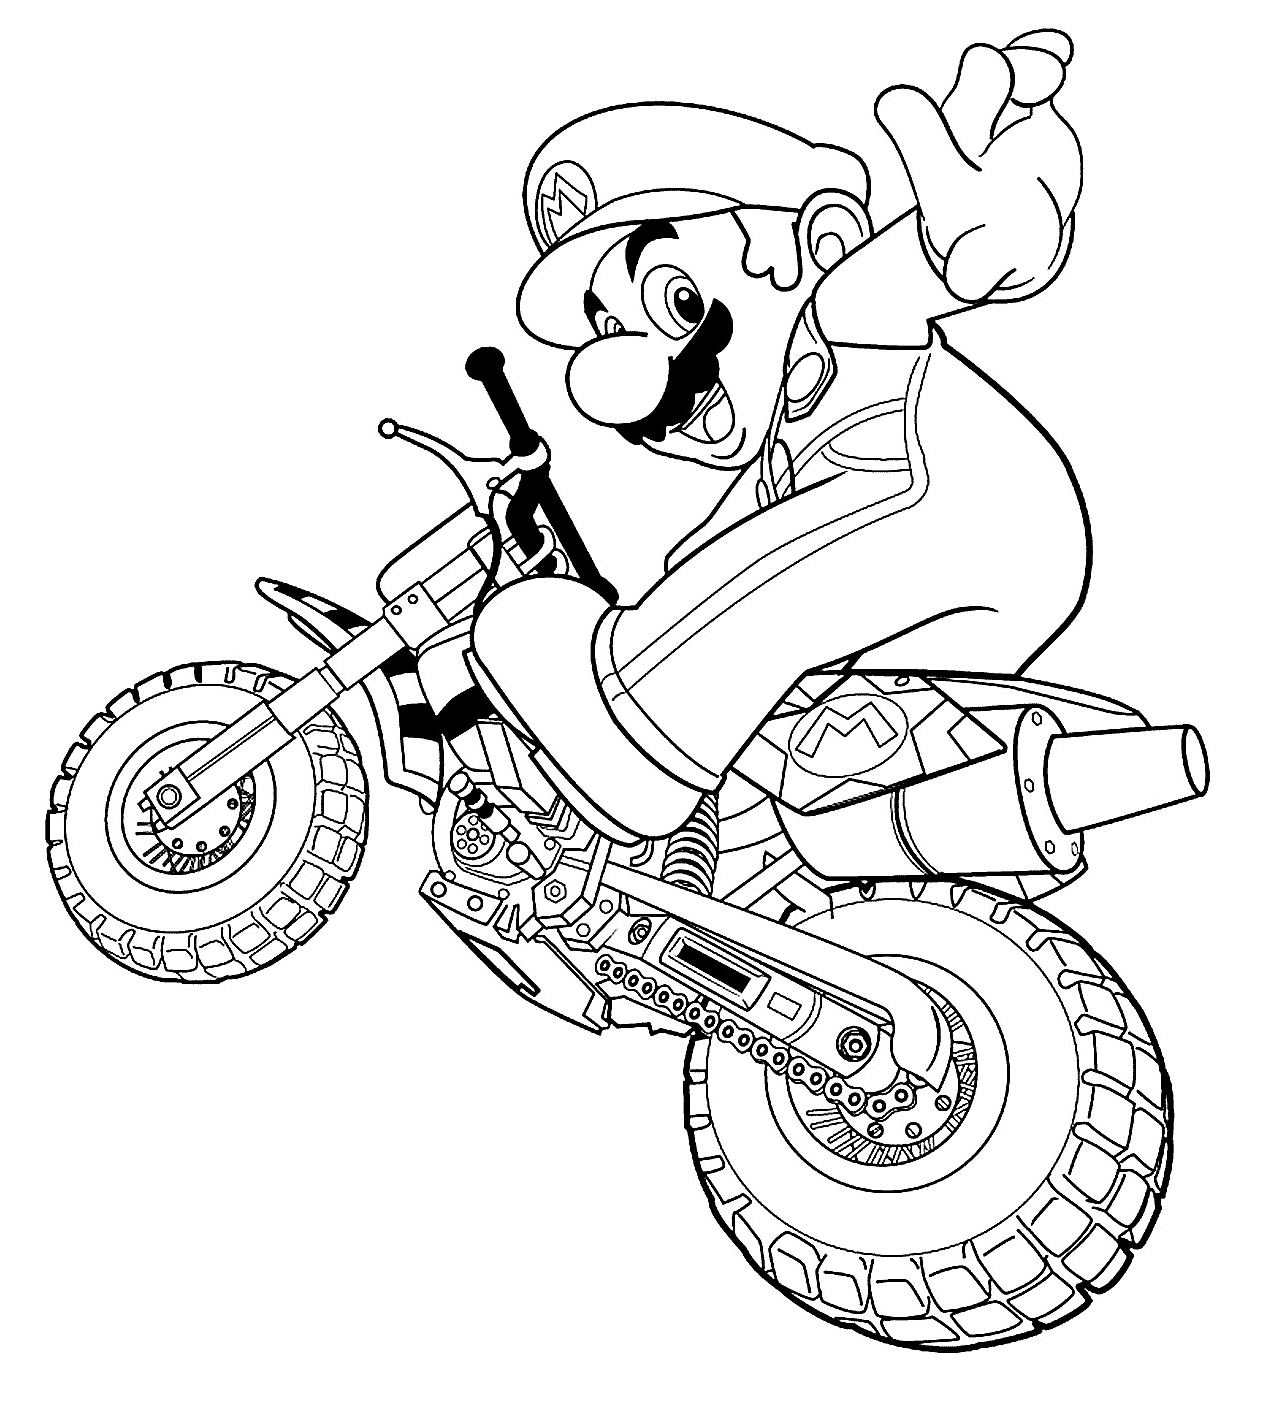 Super Mario with Dirt Bike Coloring Page